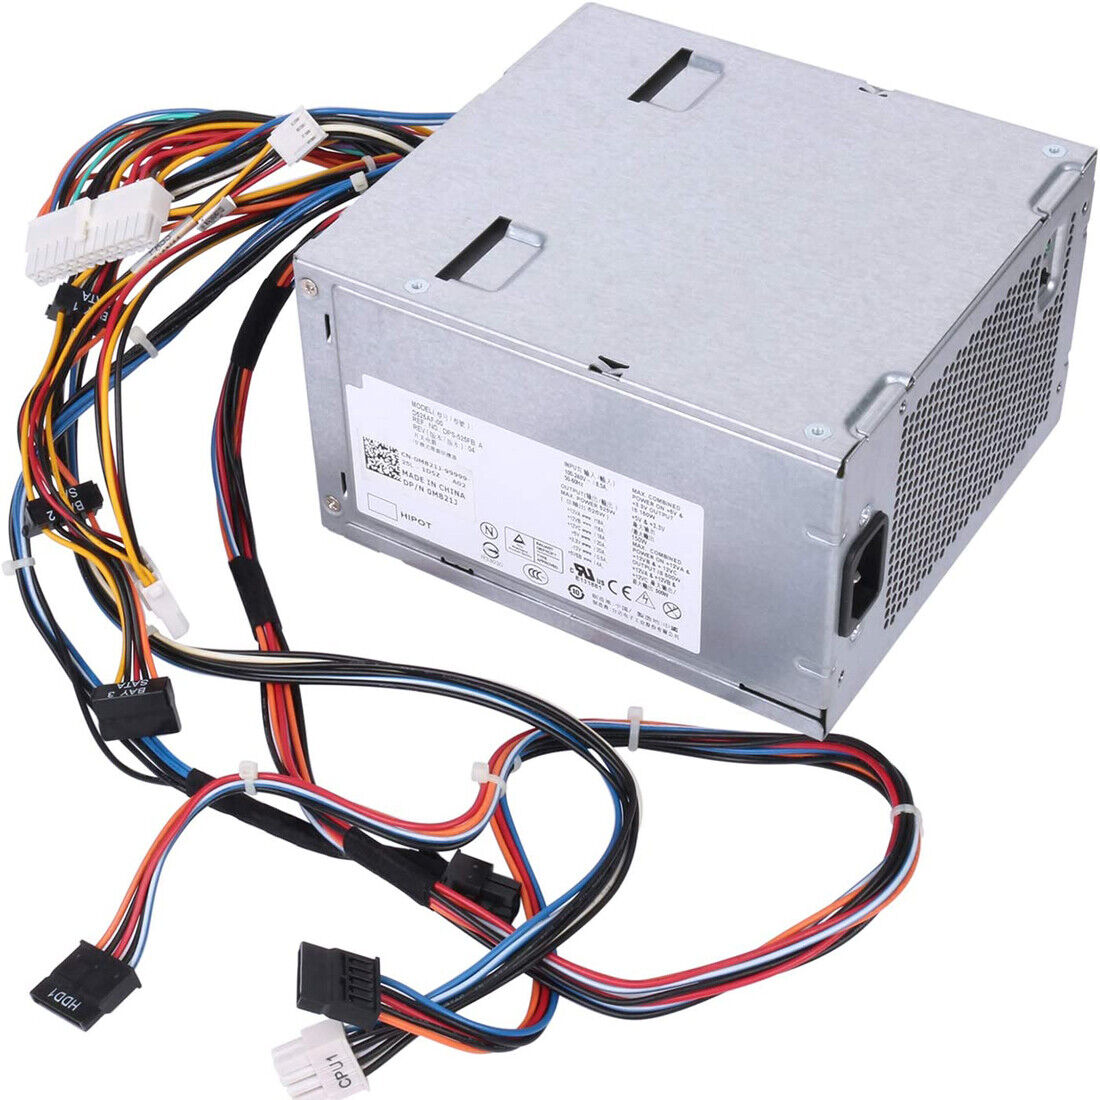 New D525AF-00 525W Power Supply For Dell Precision T3500 6W6M1 M822J U597G X008G